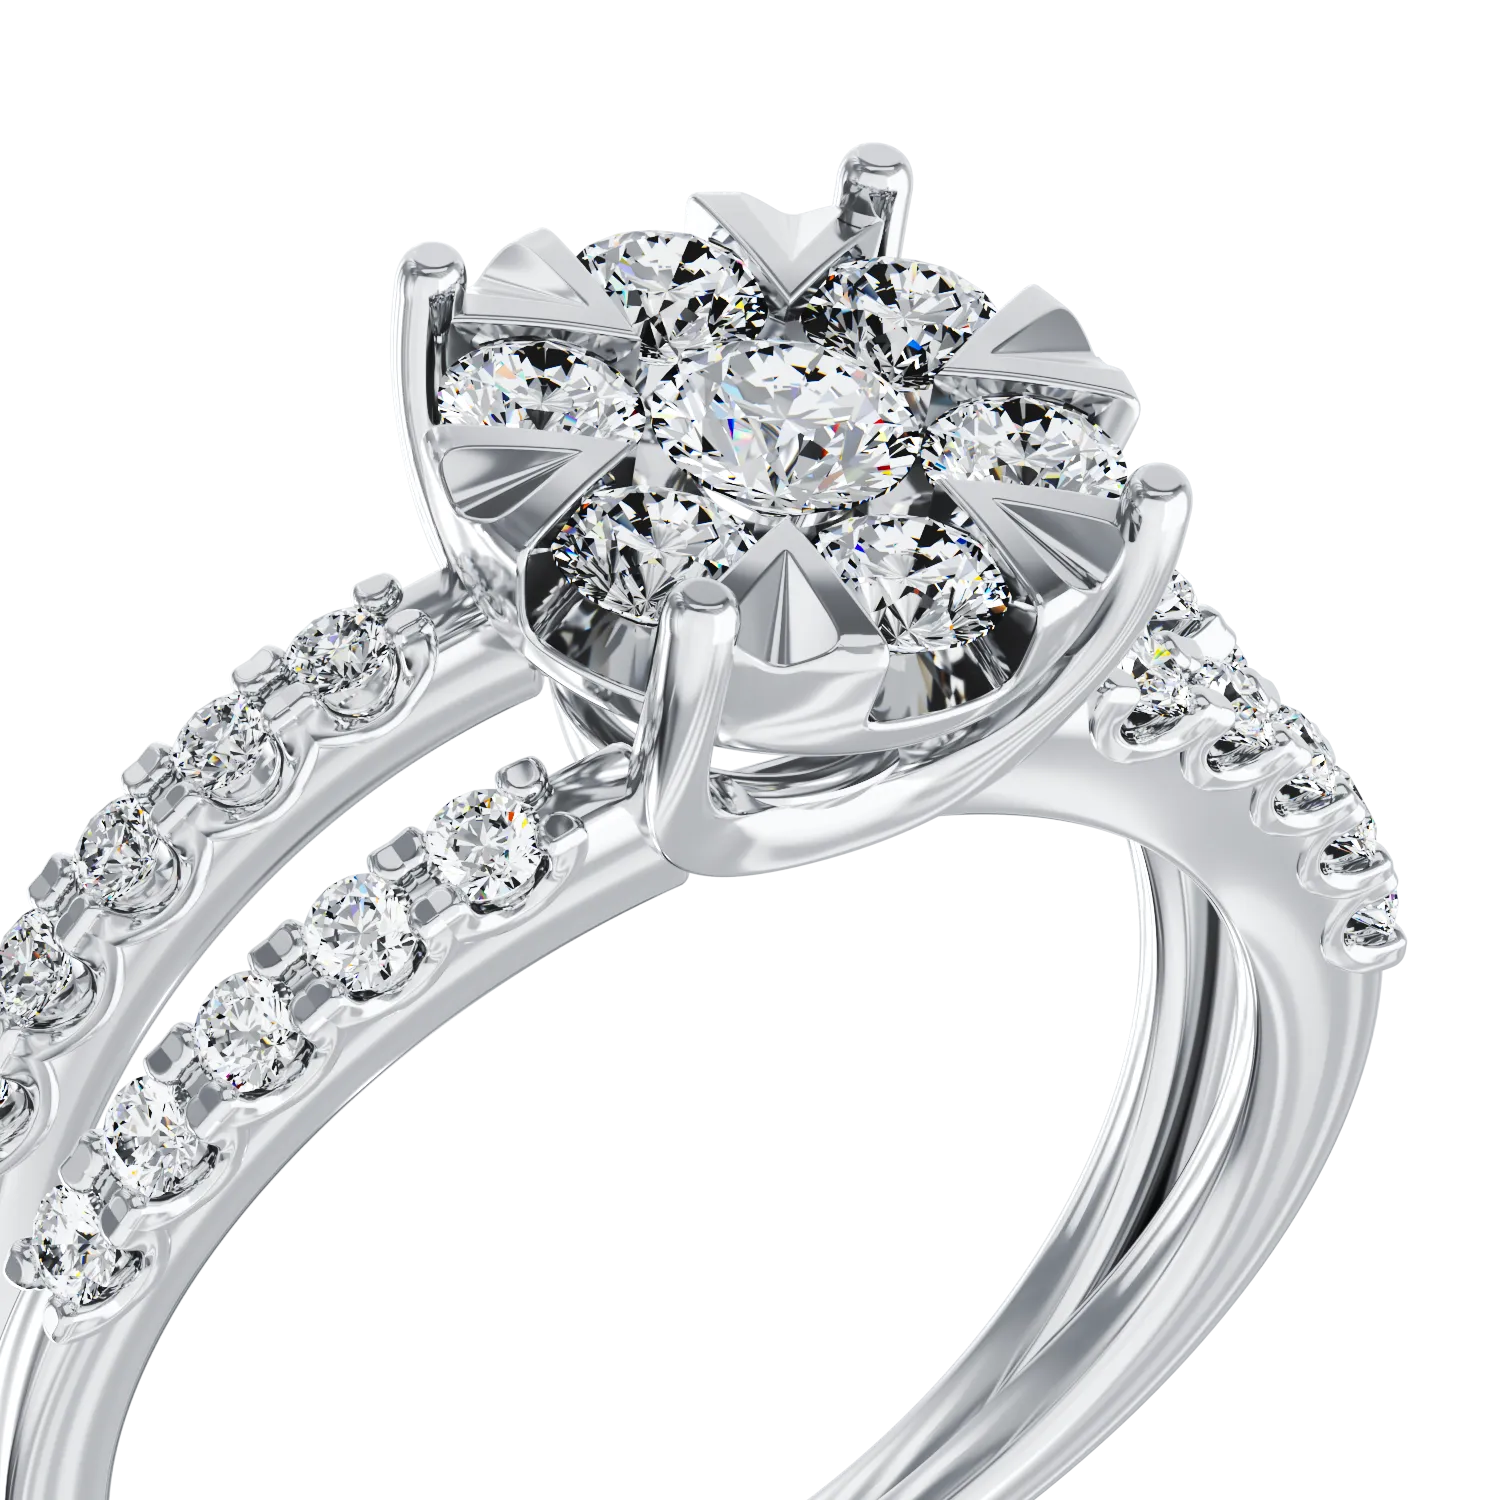 White gold engagement ring with 1ct diamonds